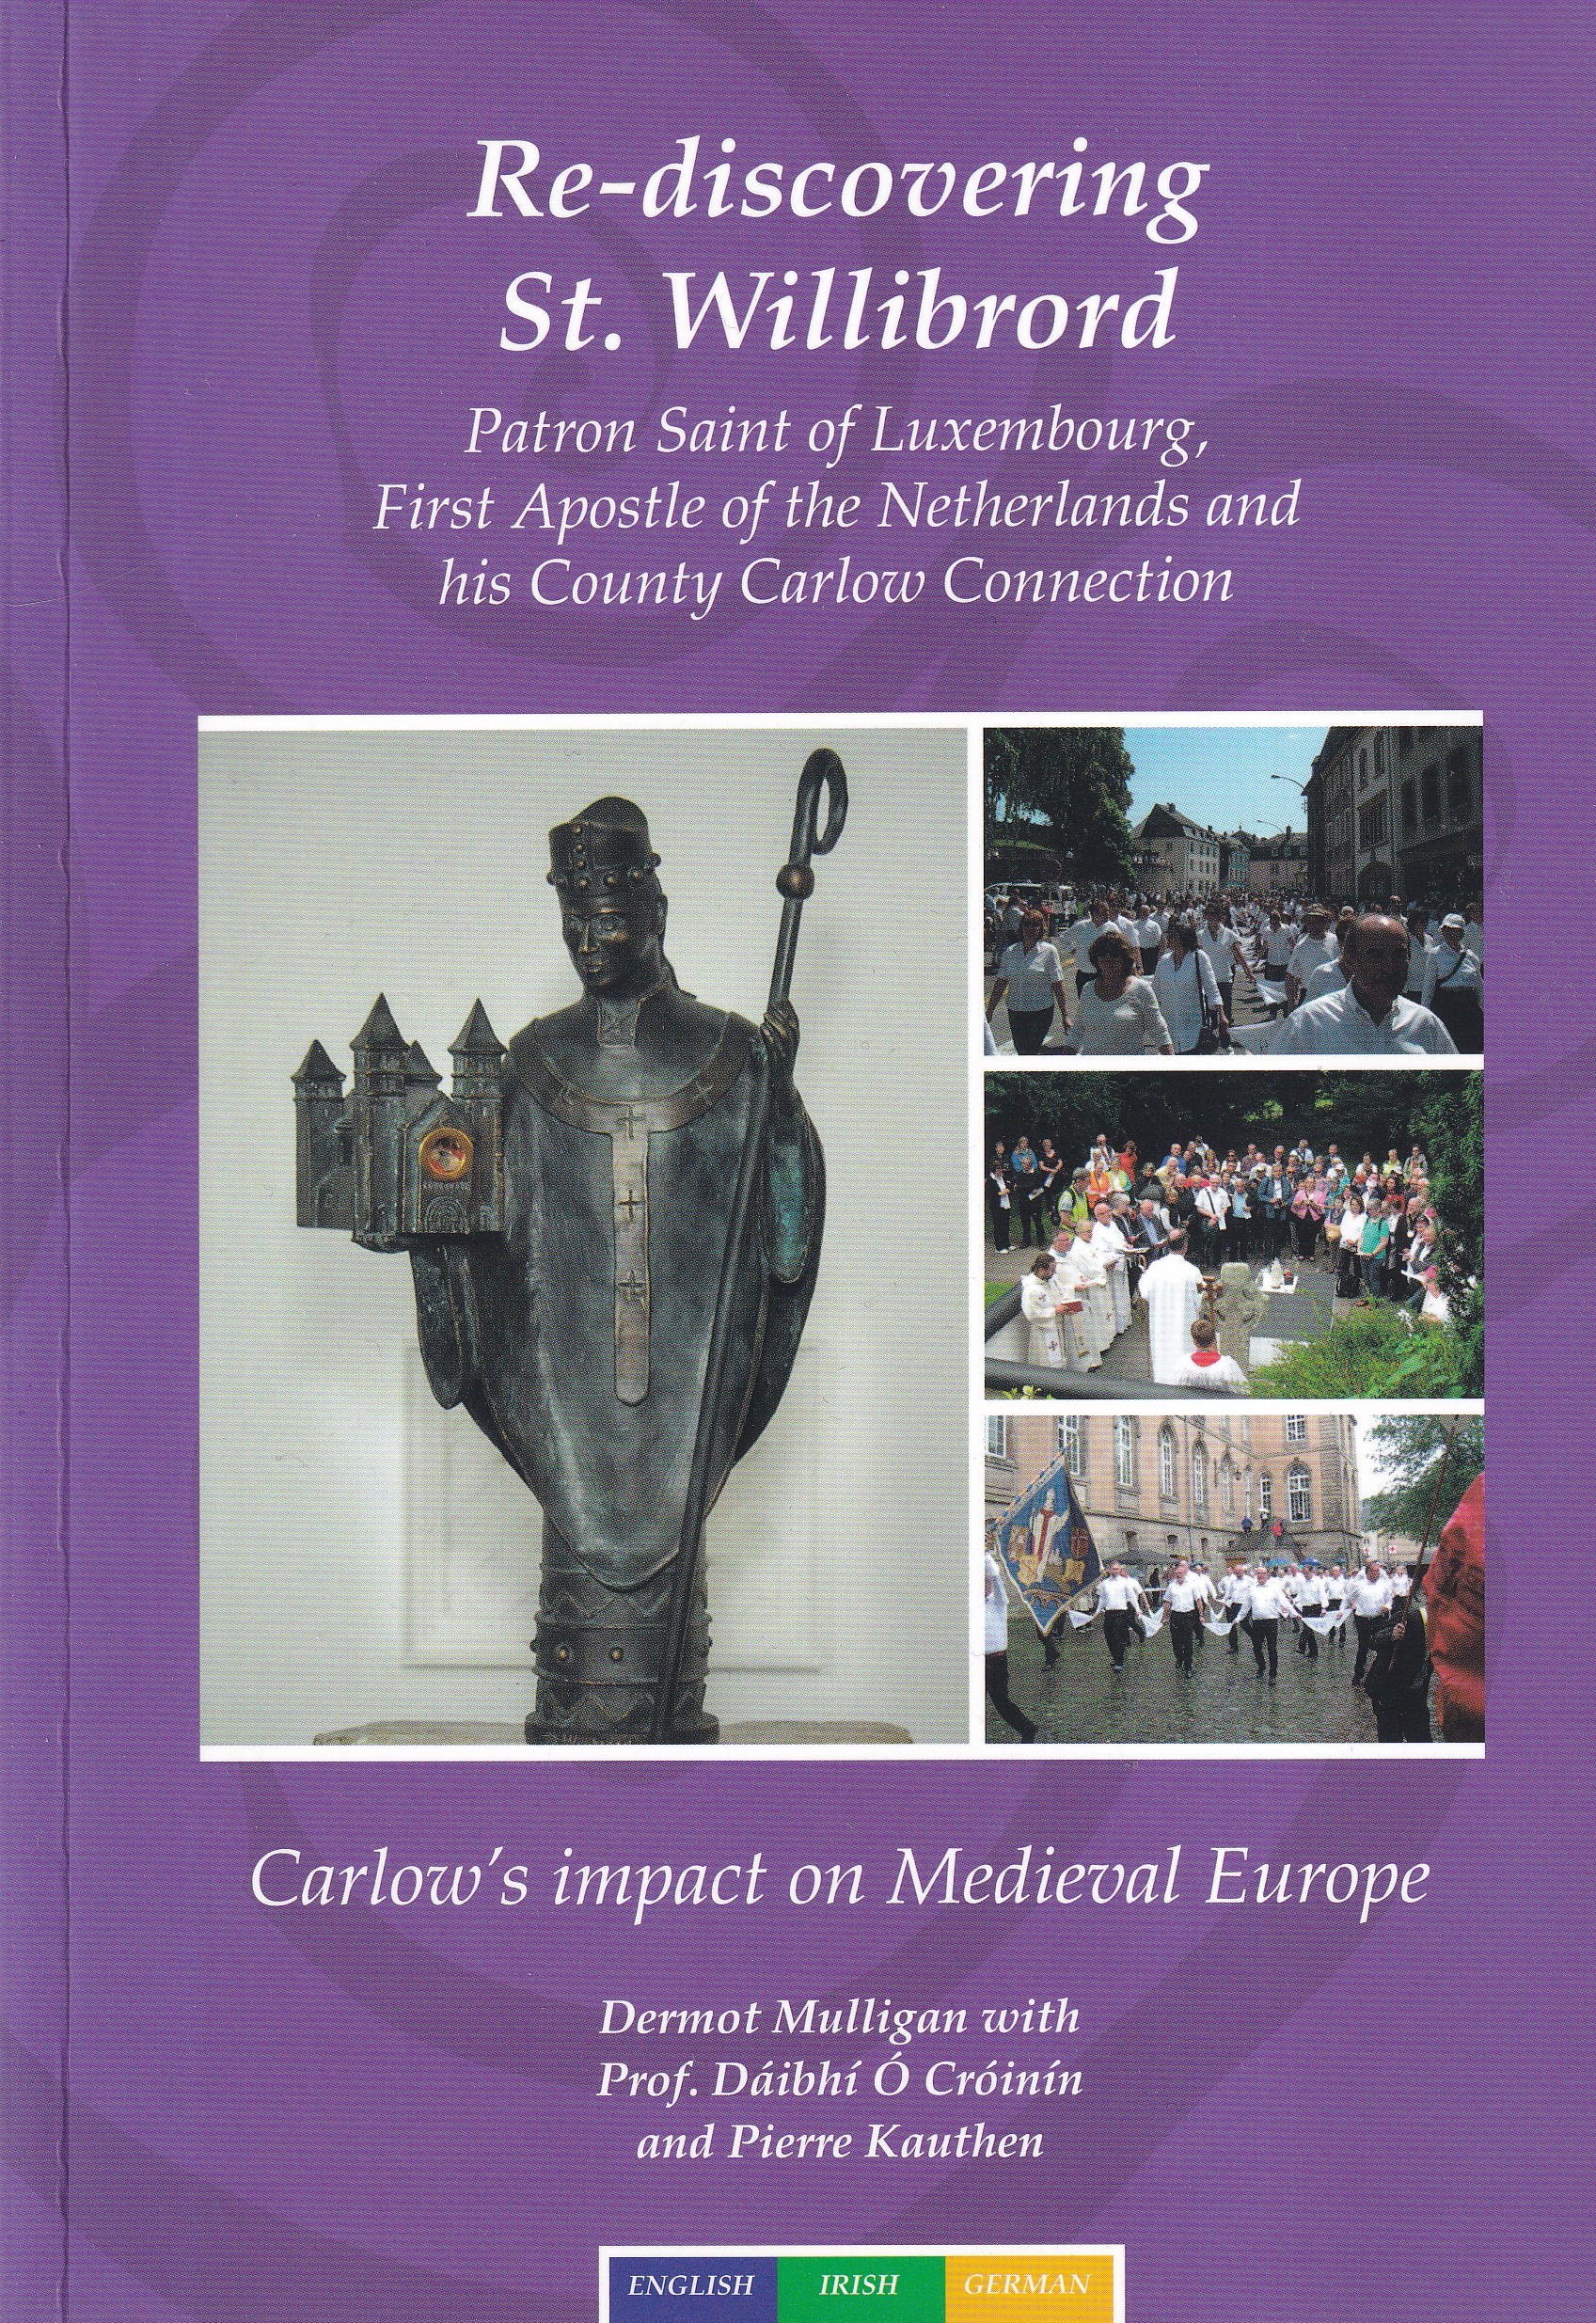 Re-discovering St. Willibrord: Patron Saint of Luxembourg, First Apostle of the Netherlands and his County Carlow Connection- Carlow’s Impact on Medieval Europe- Signed | Dermot Mulligan, Dáibhí Ó Cróinín and Pierre Kauthen | Charlie Byrne's